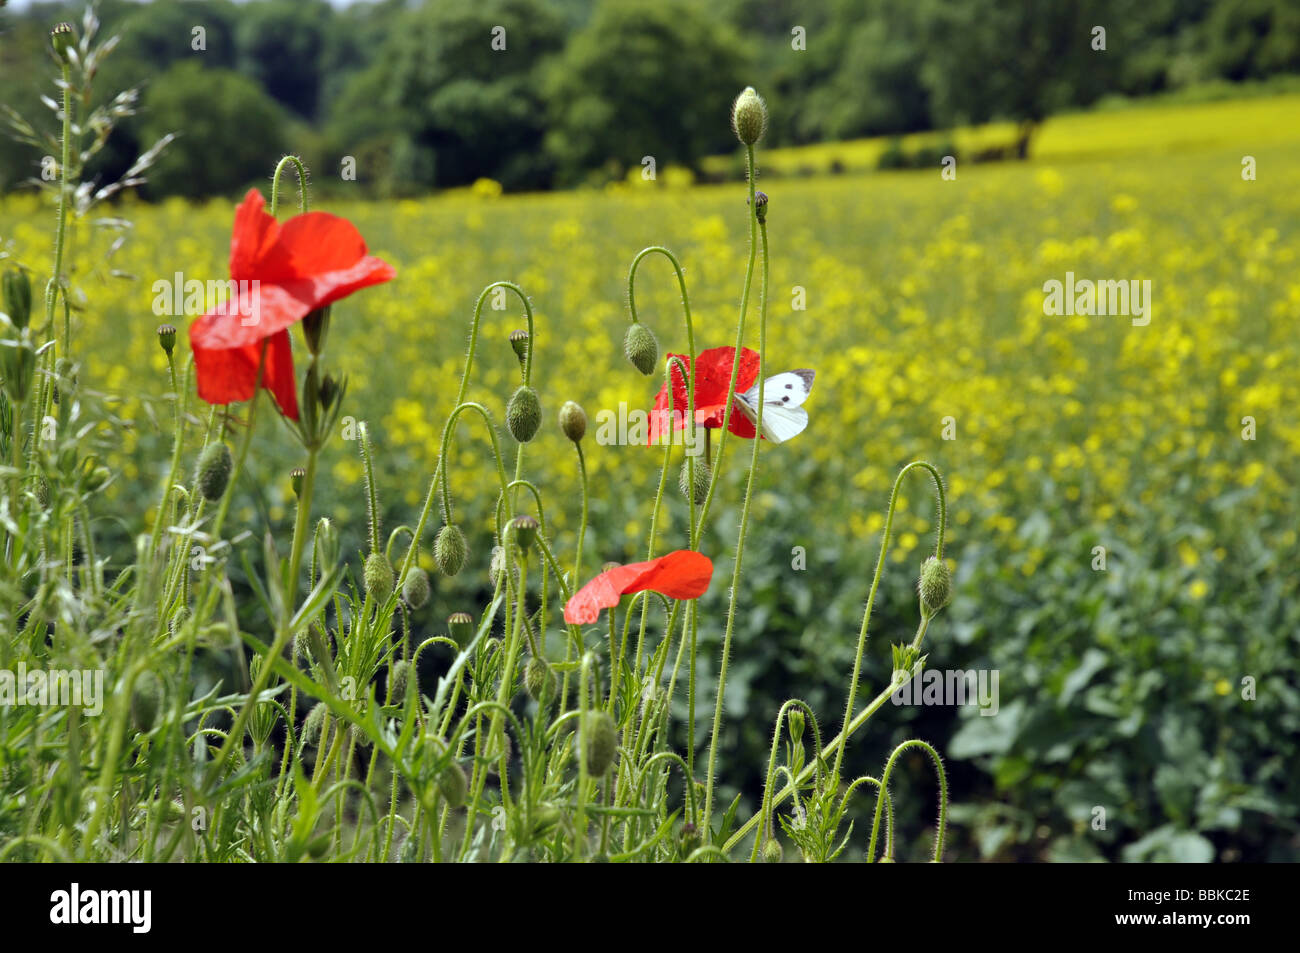 Poppies in a classic English country setting summer Stock Photo